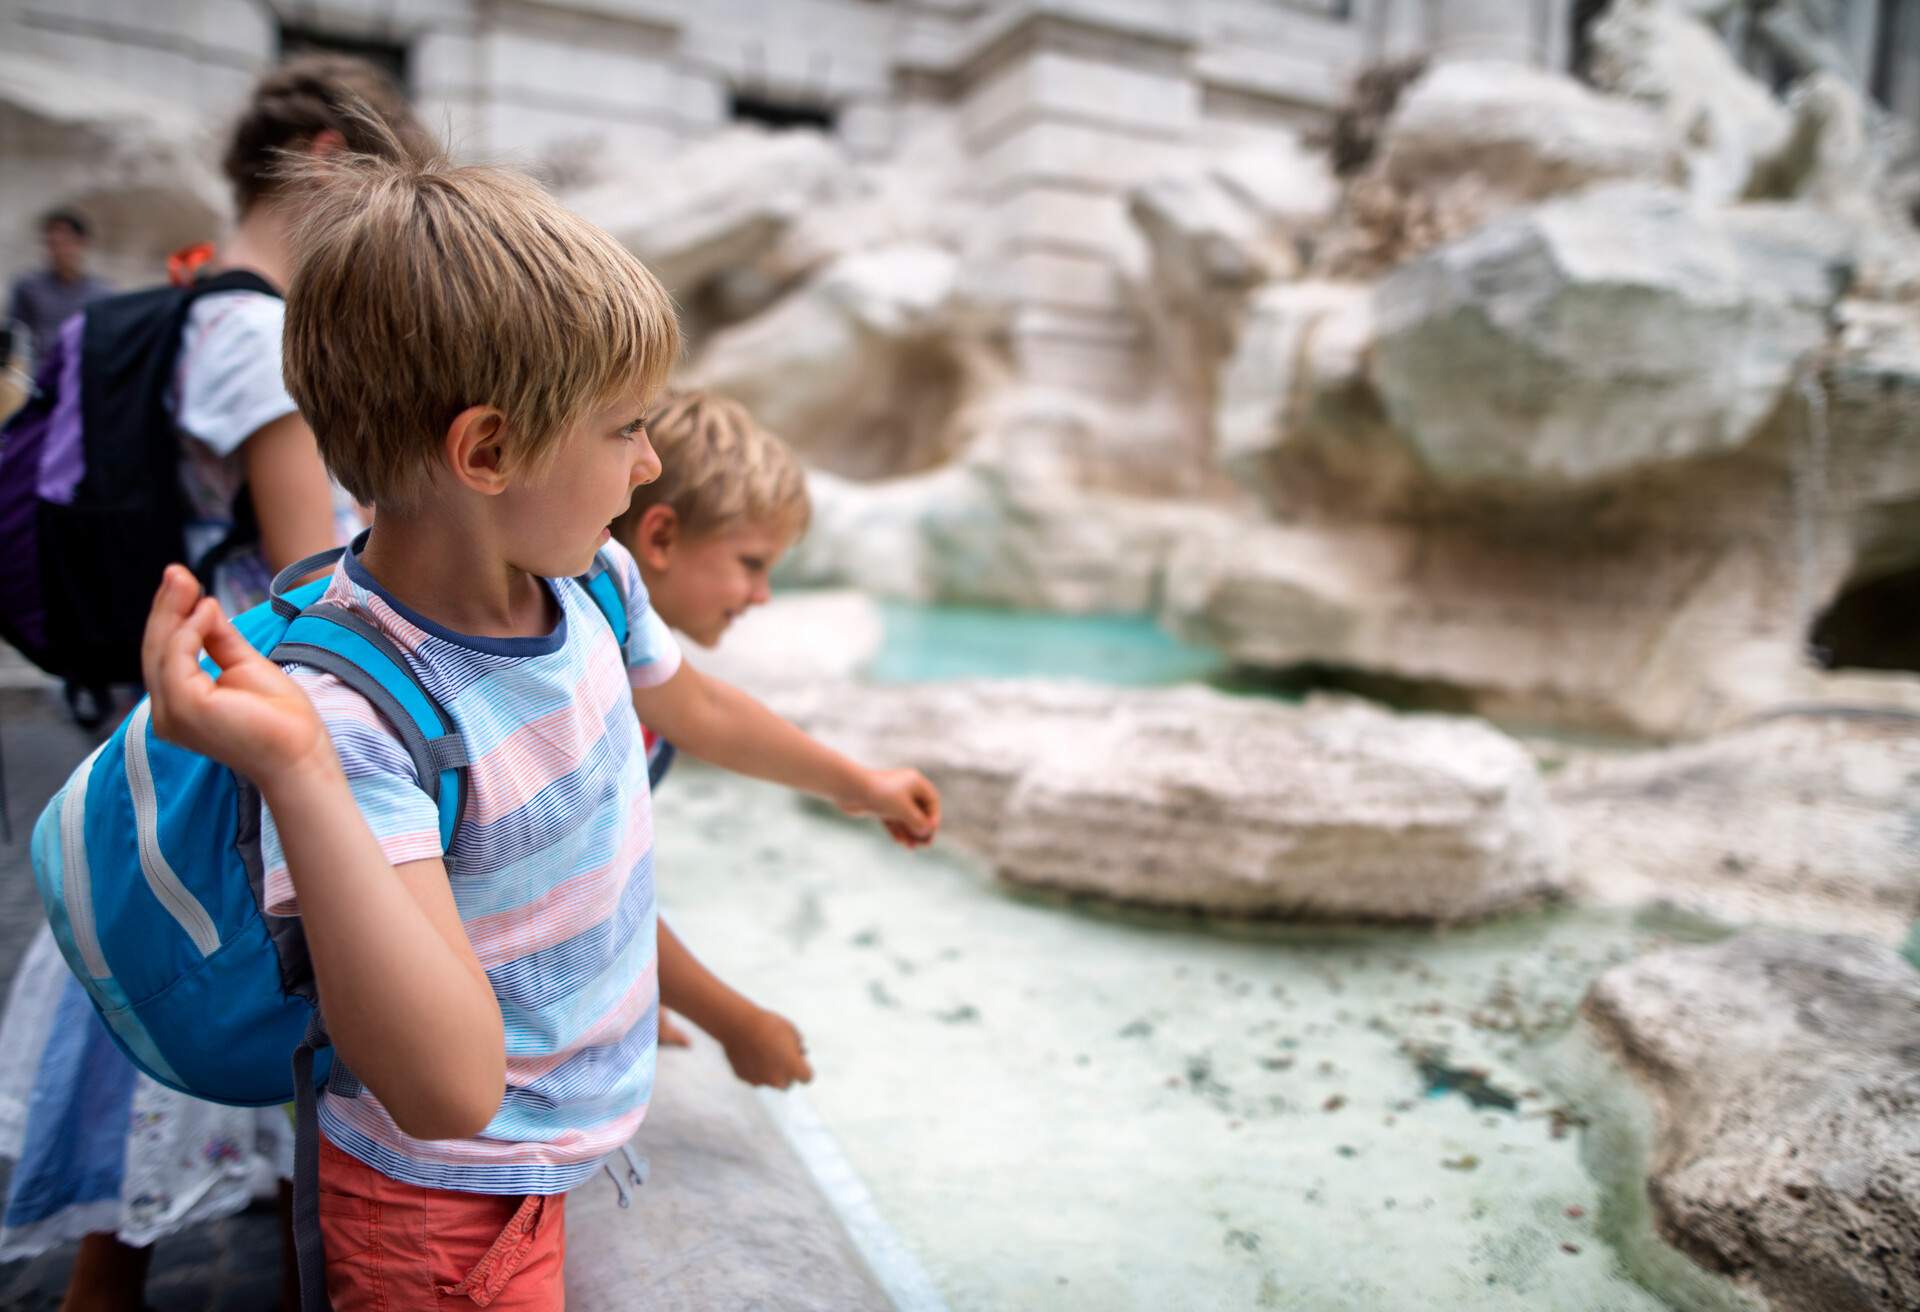 Kids sightseeing Rome, Italy. They are throwing coins into Trevi Fountain, Rome..Nikon D800